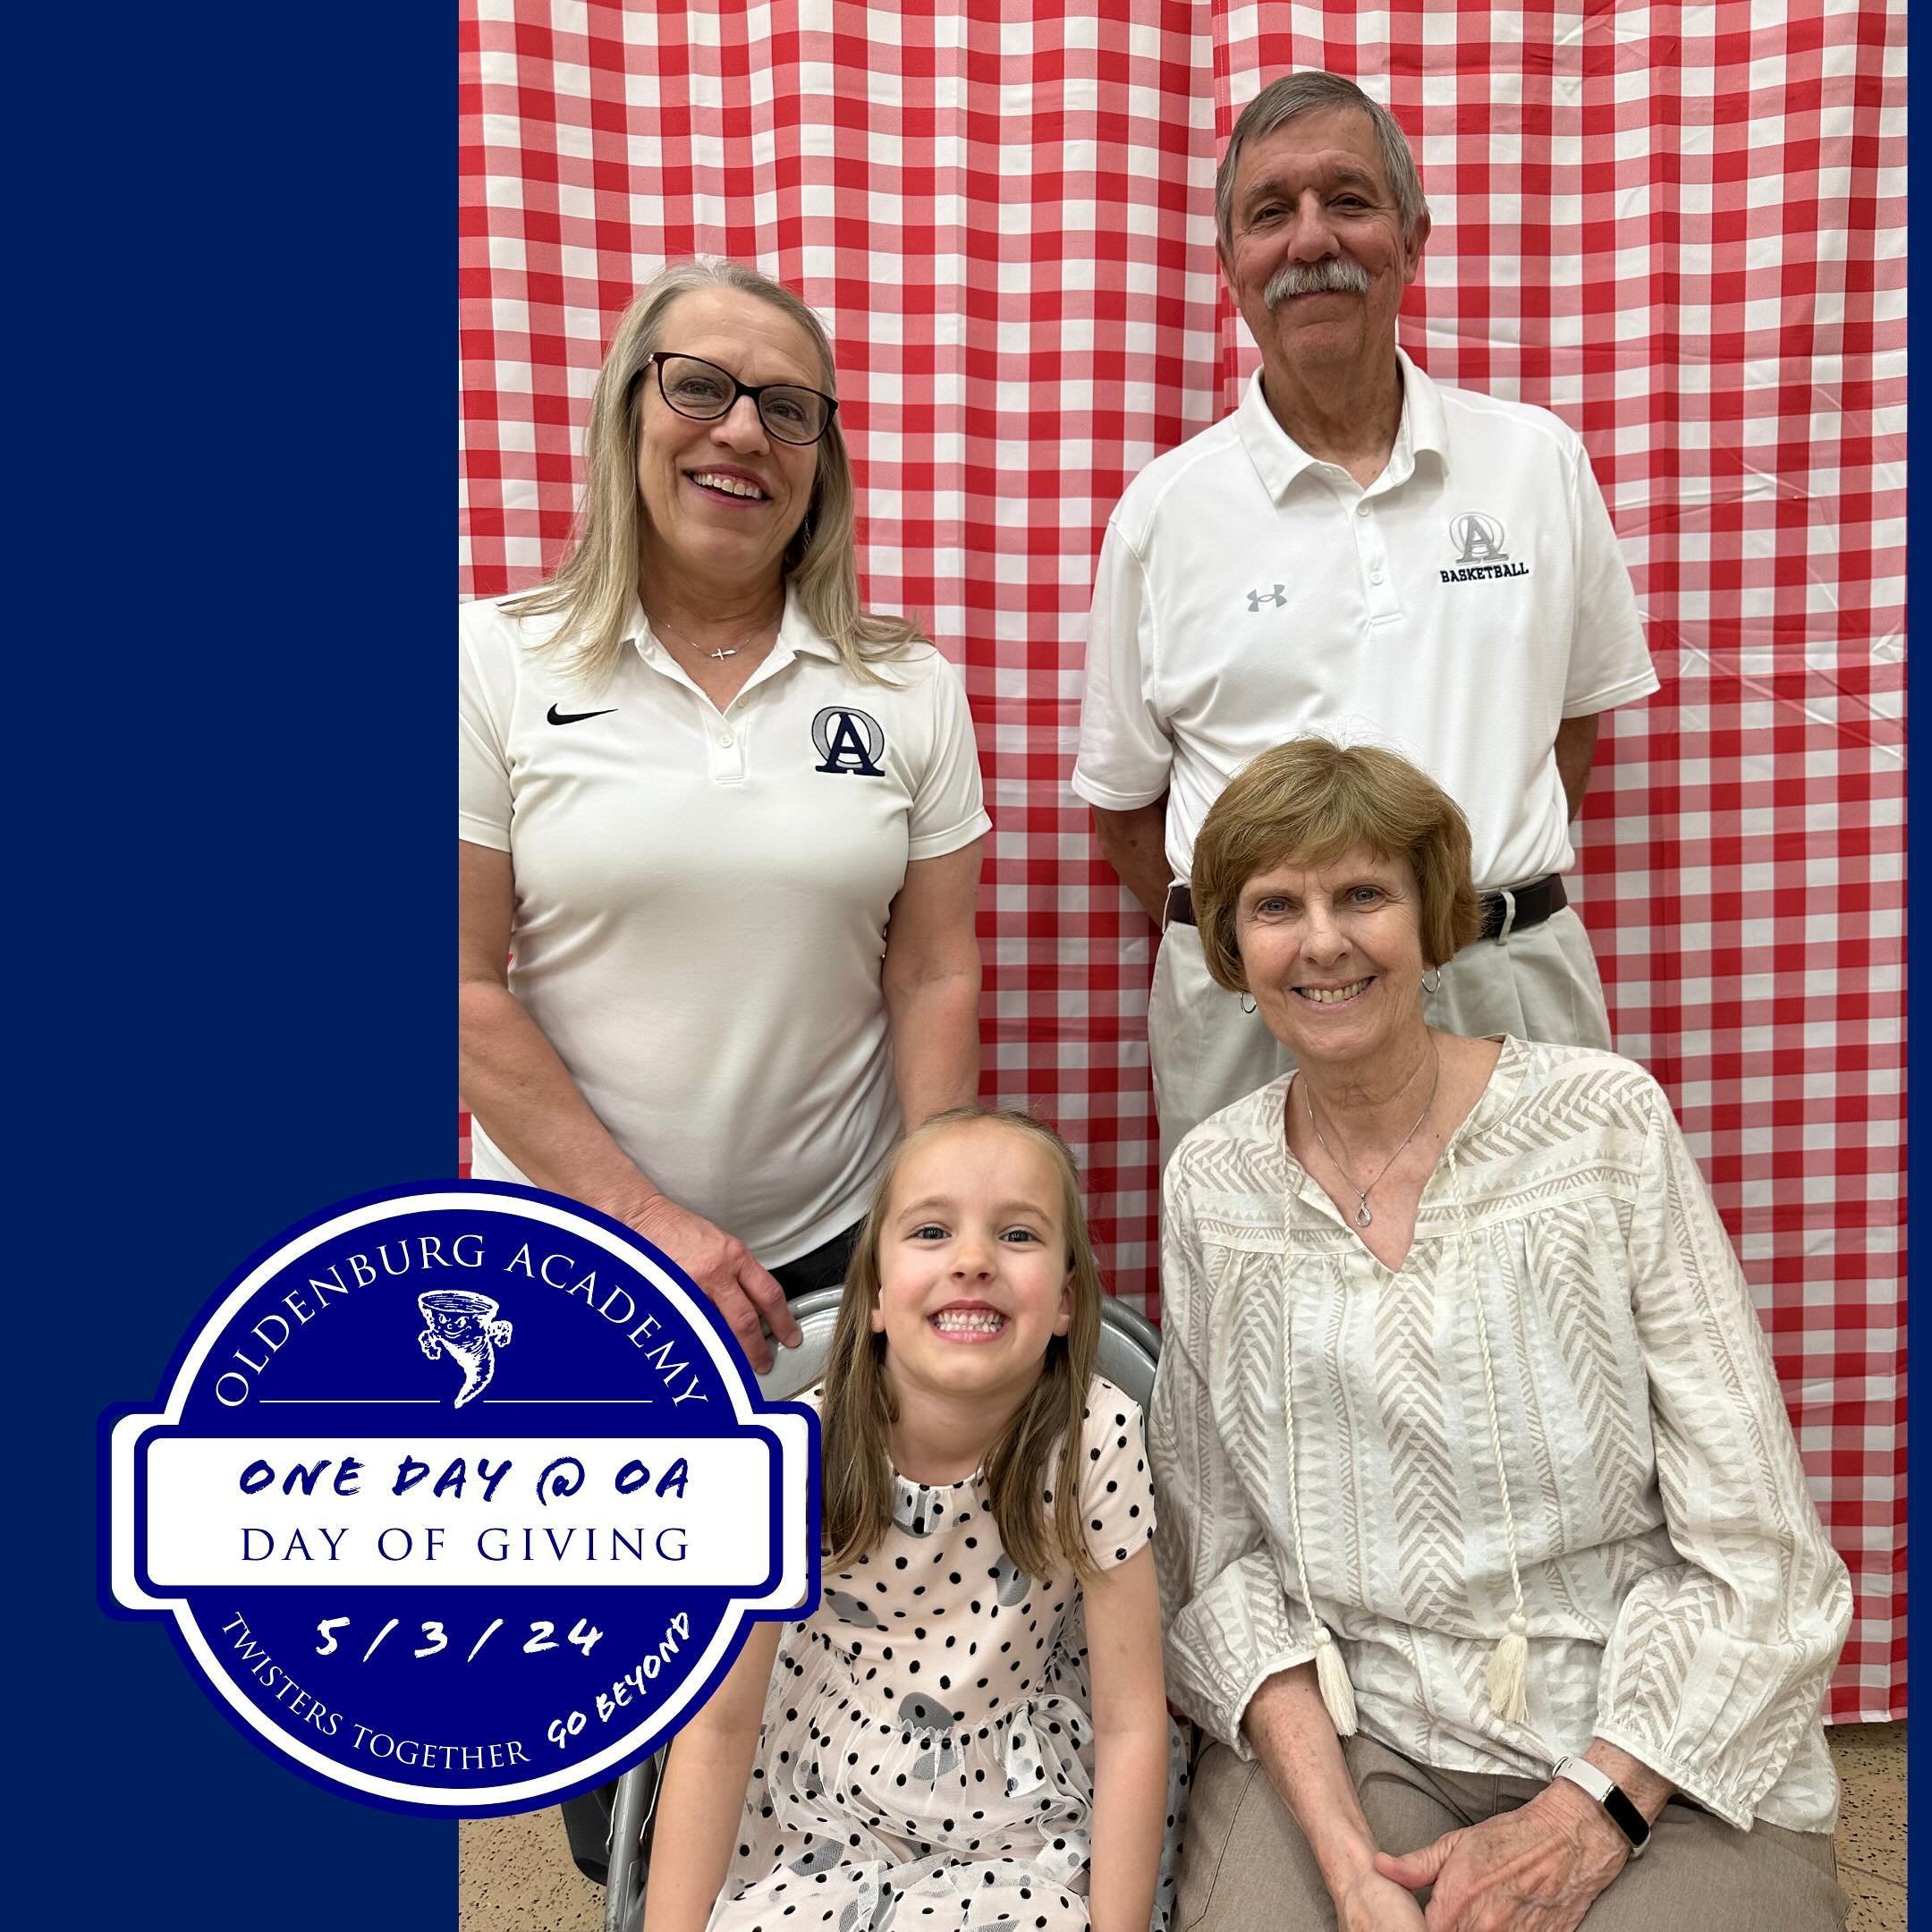 Geraldine Moster Kuntz &lsquo;81 and Jim &amp; Mary Pat Higdon celebrated Tea With Grandparents at Saint Louis School today with their granddaughter, Maria! 

We loved seeing them in their OA gear!